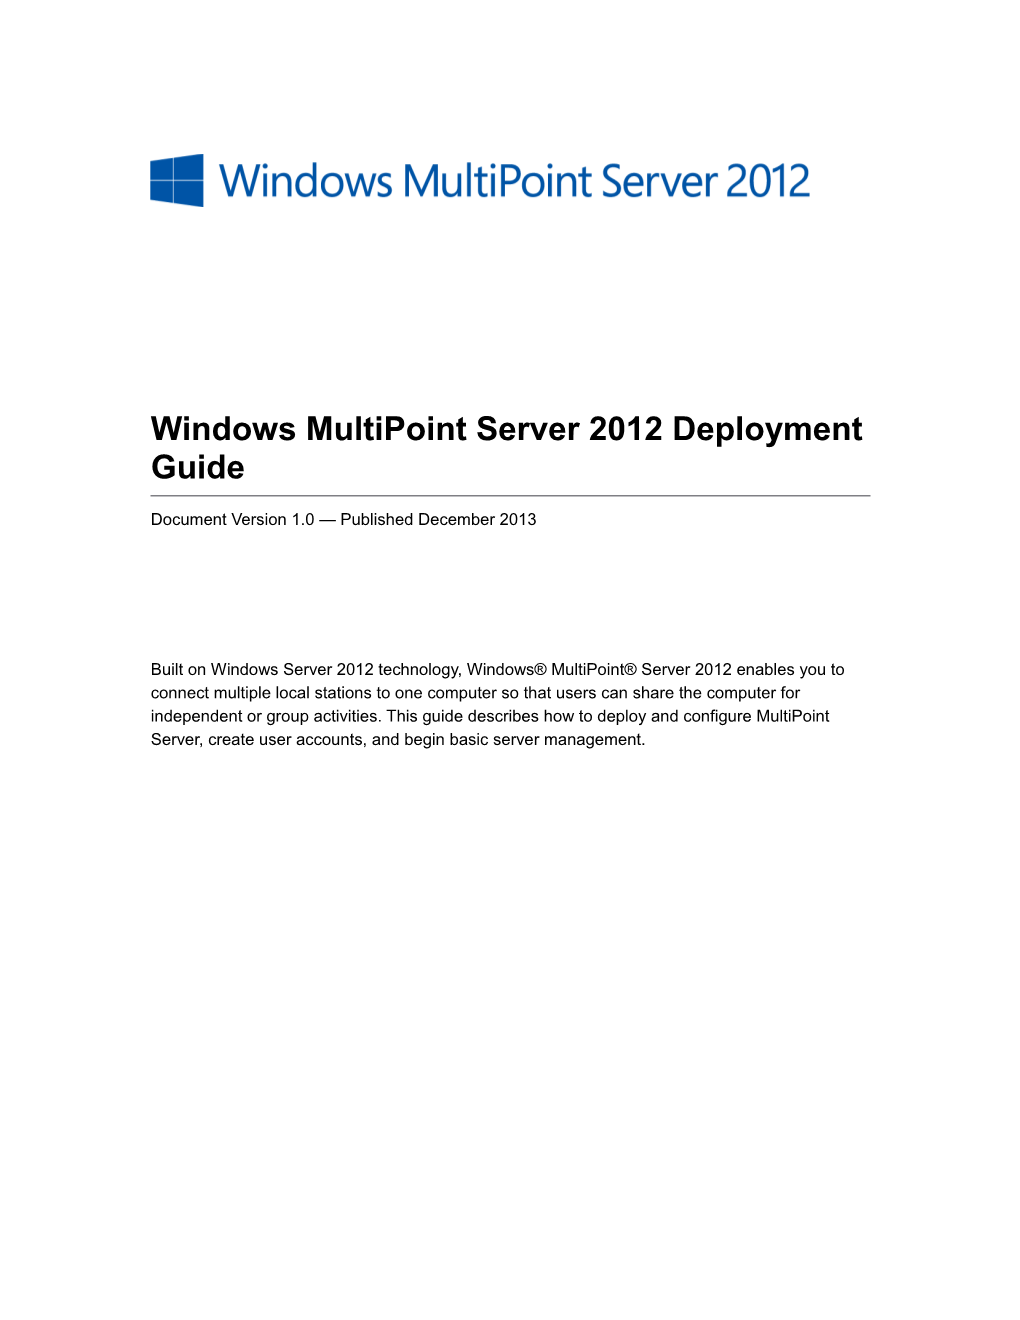 Windows Multipoint Server 2012 Deployment Guide